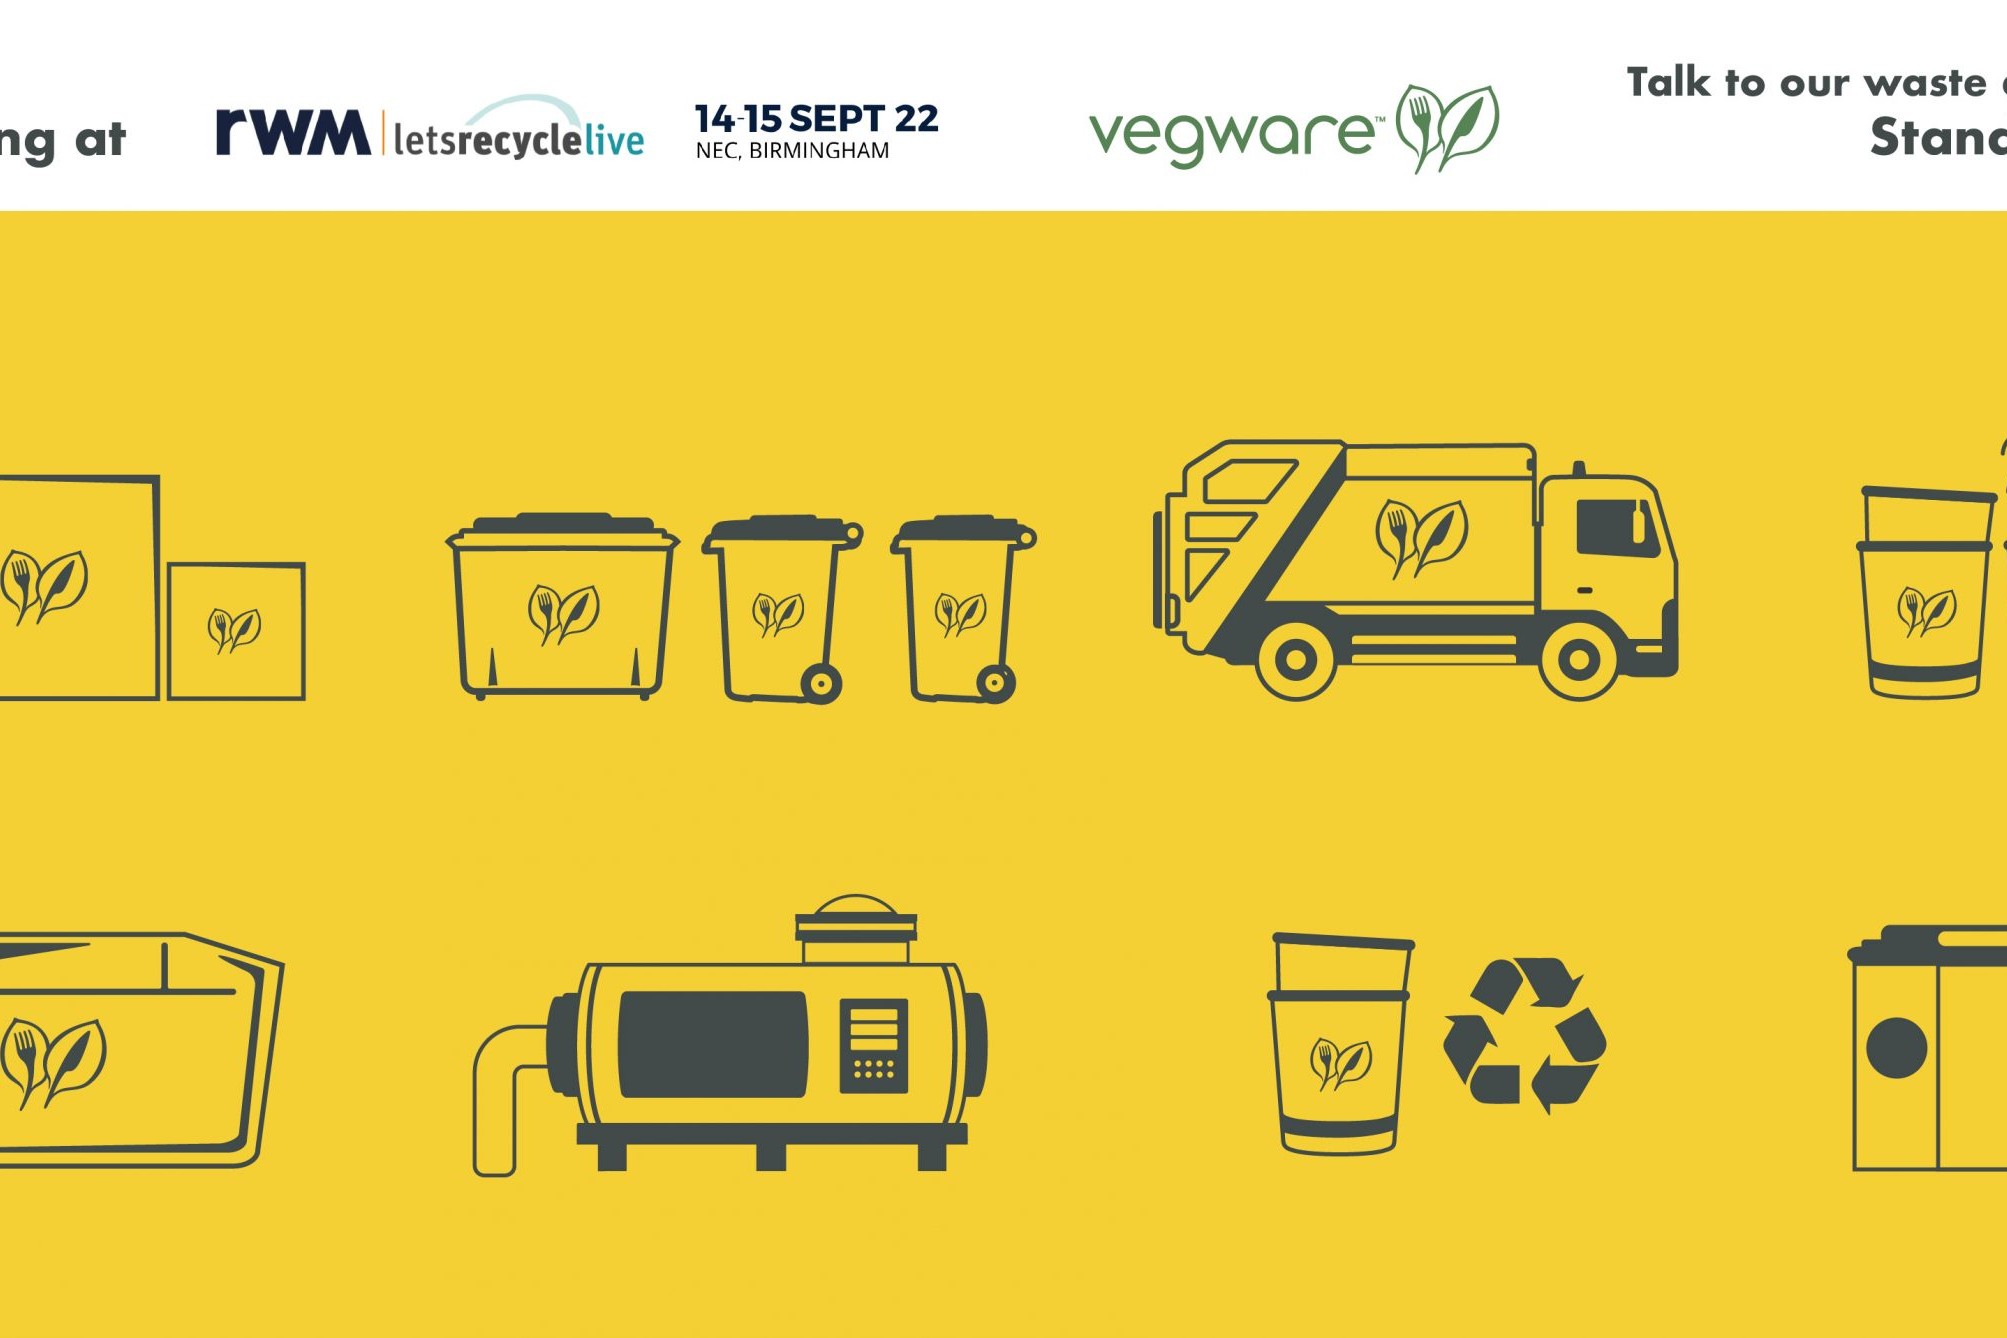 Vegware are at RWM Letsrecycle Live 2022!